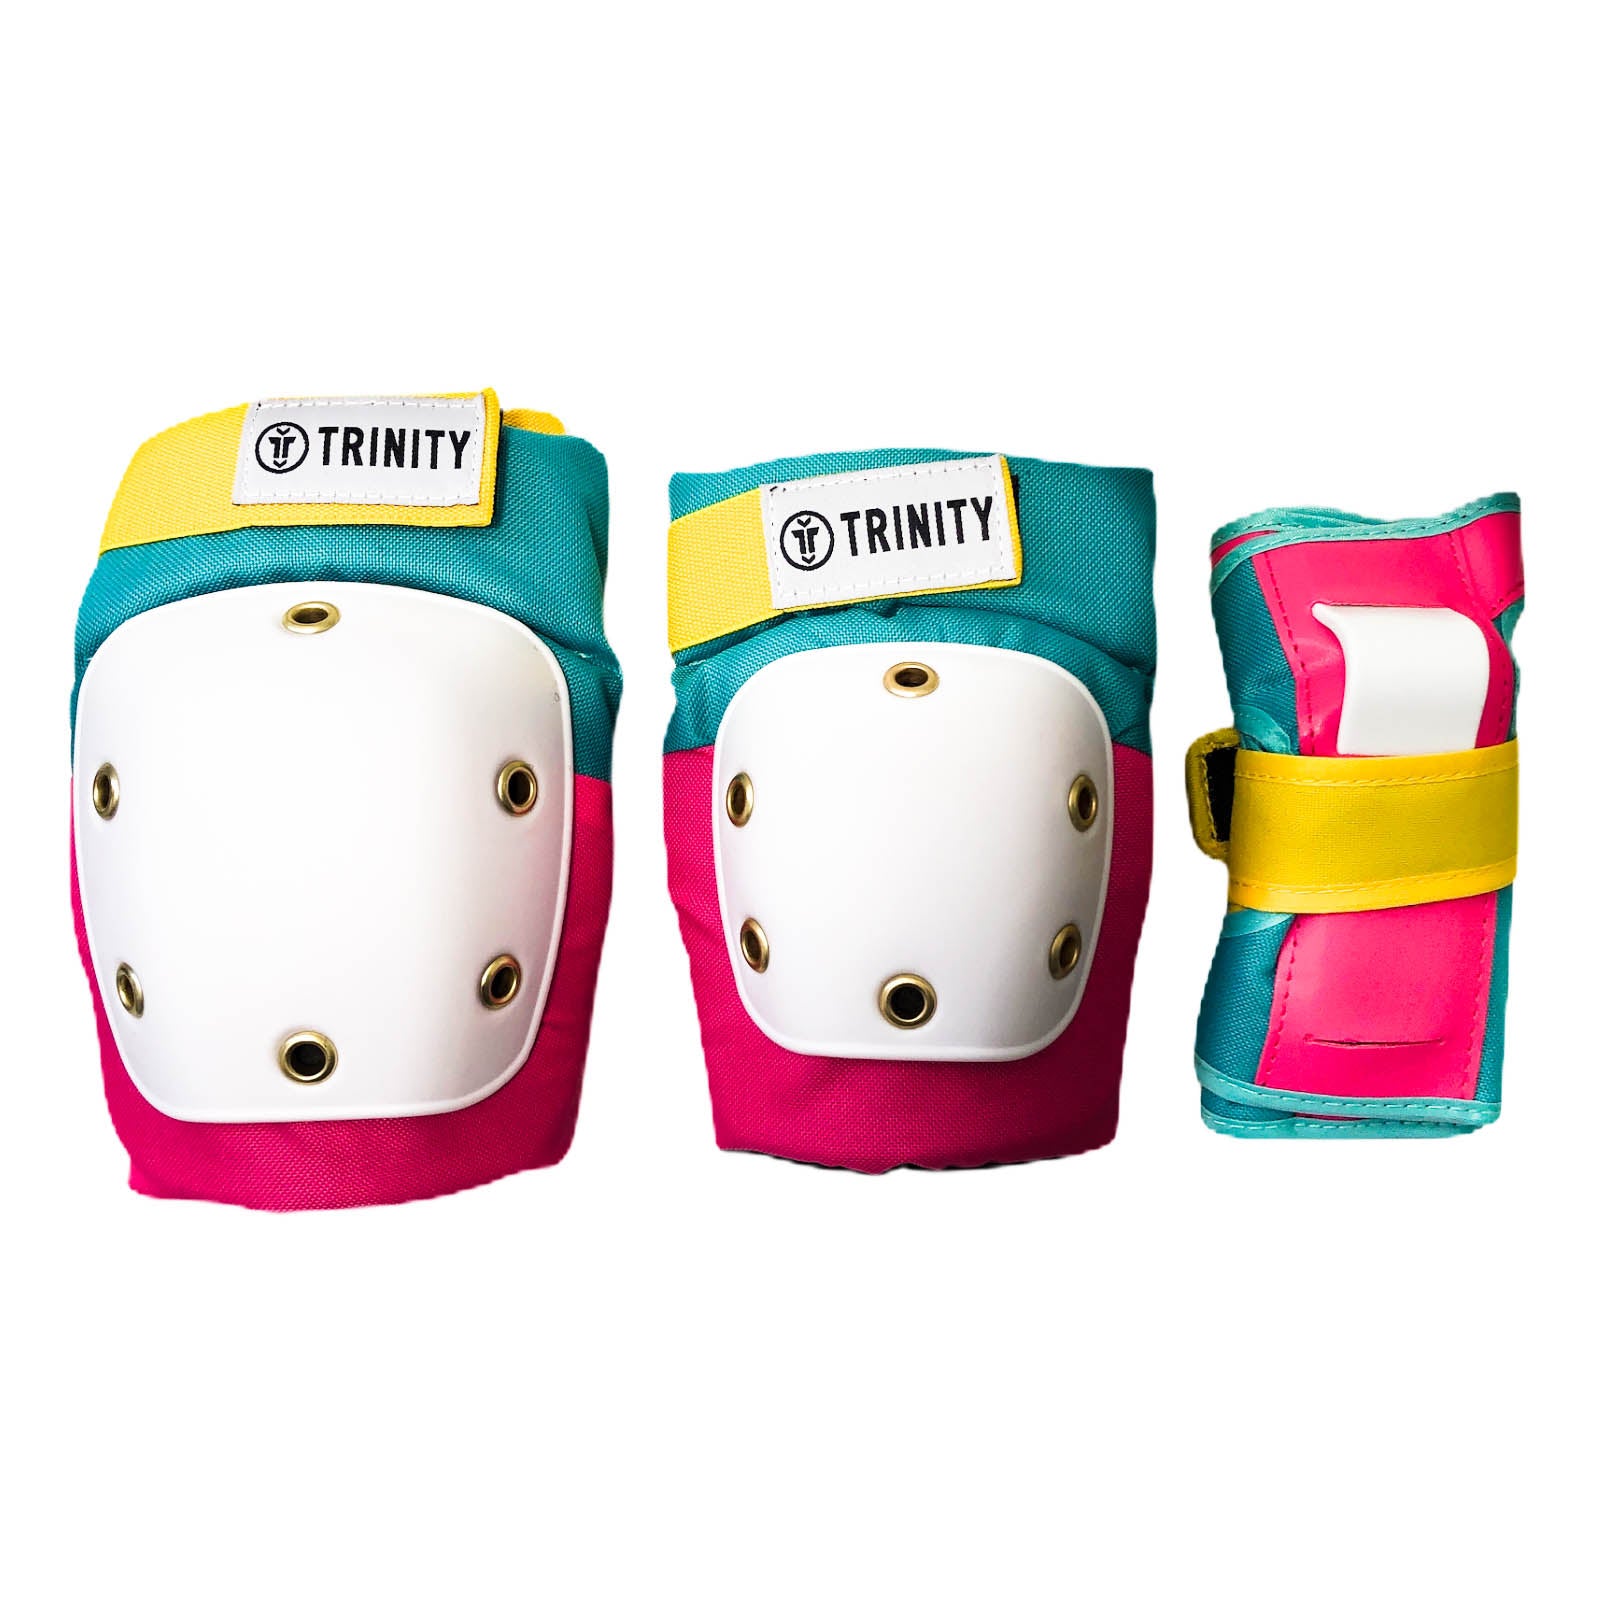 Trinity Pad Pack - Teal/Pink/Yellow